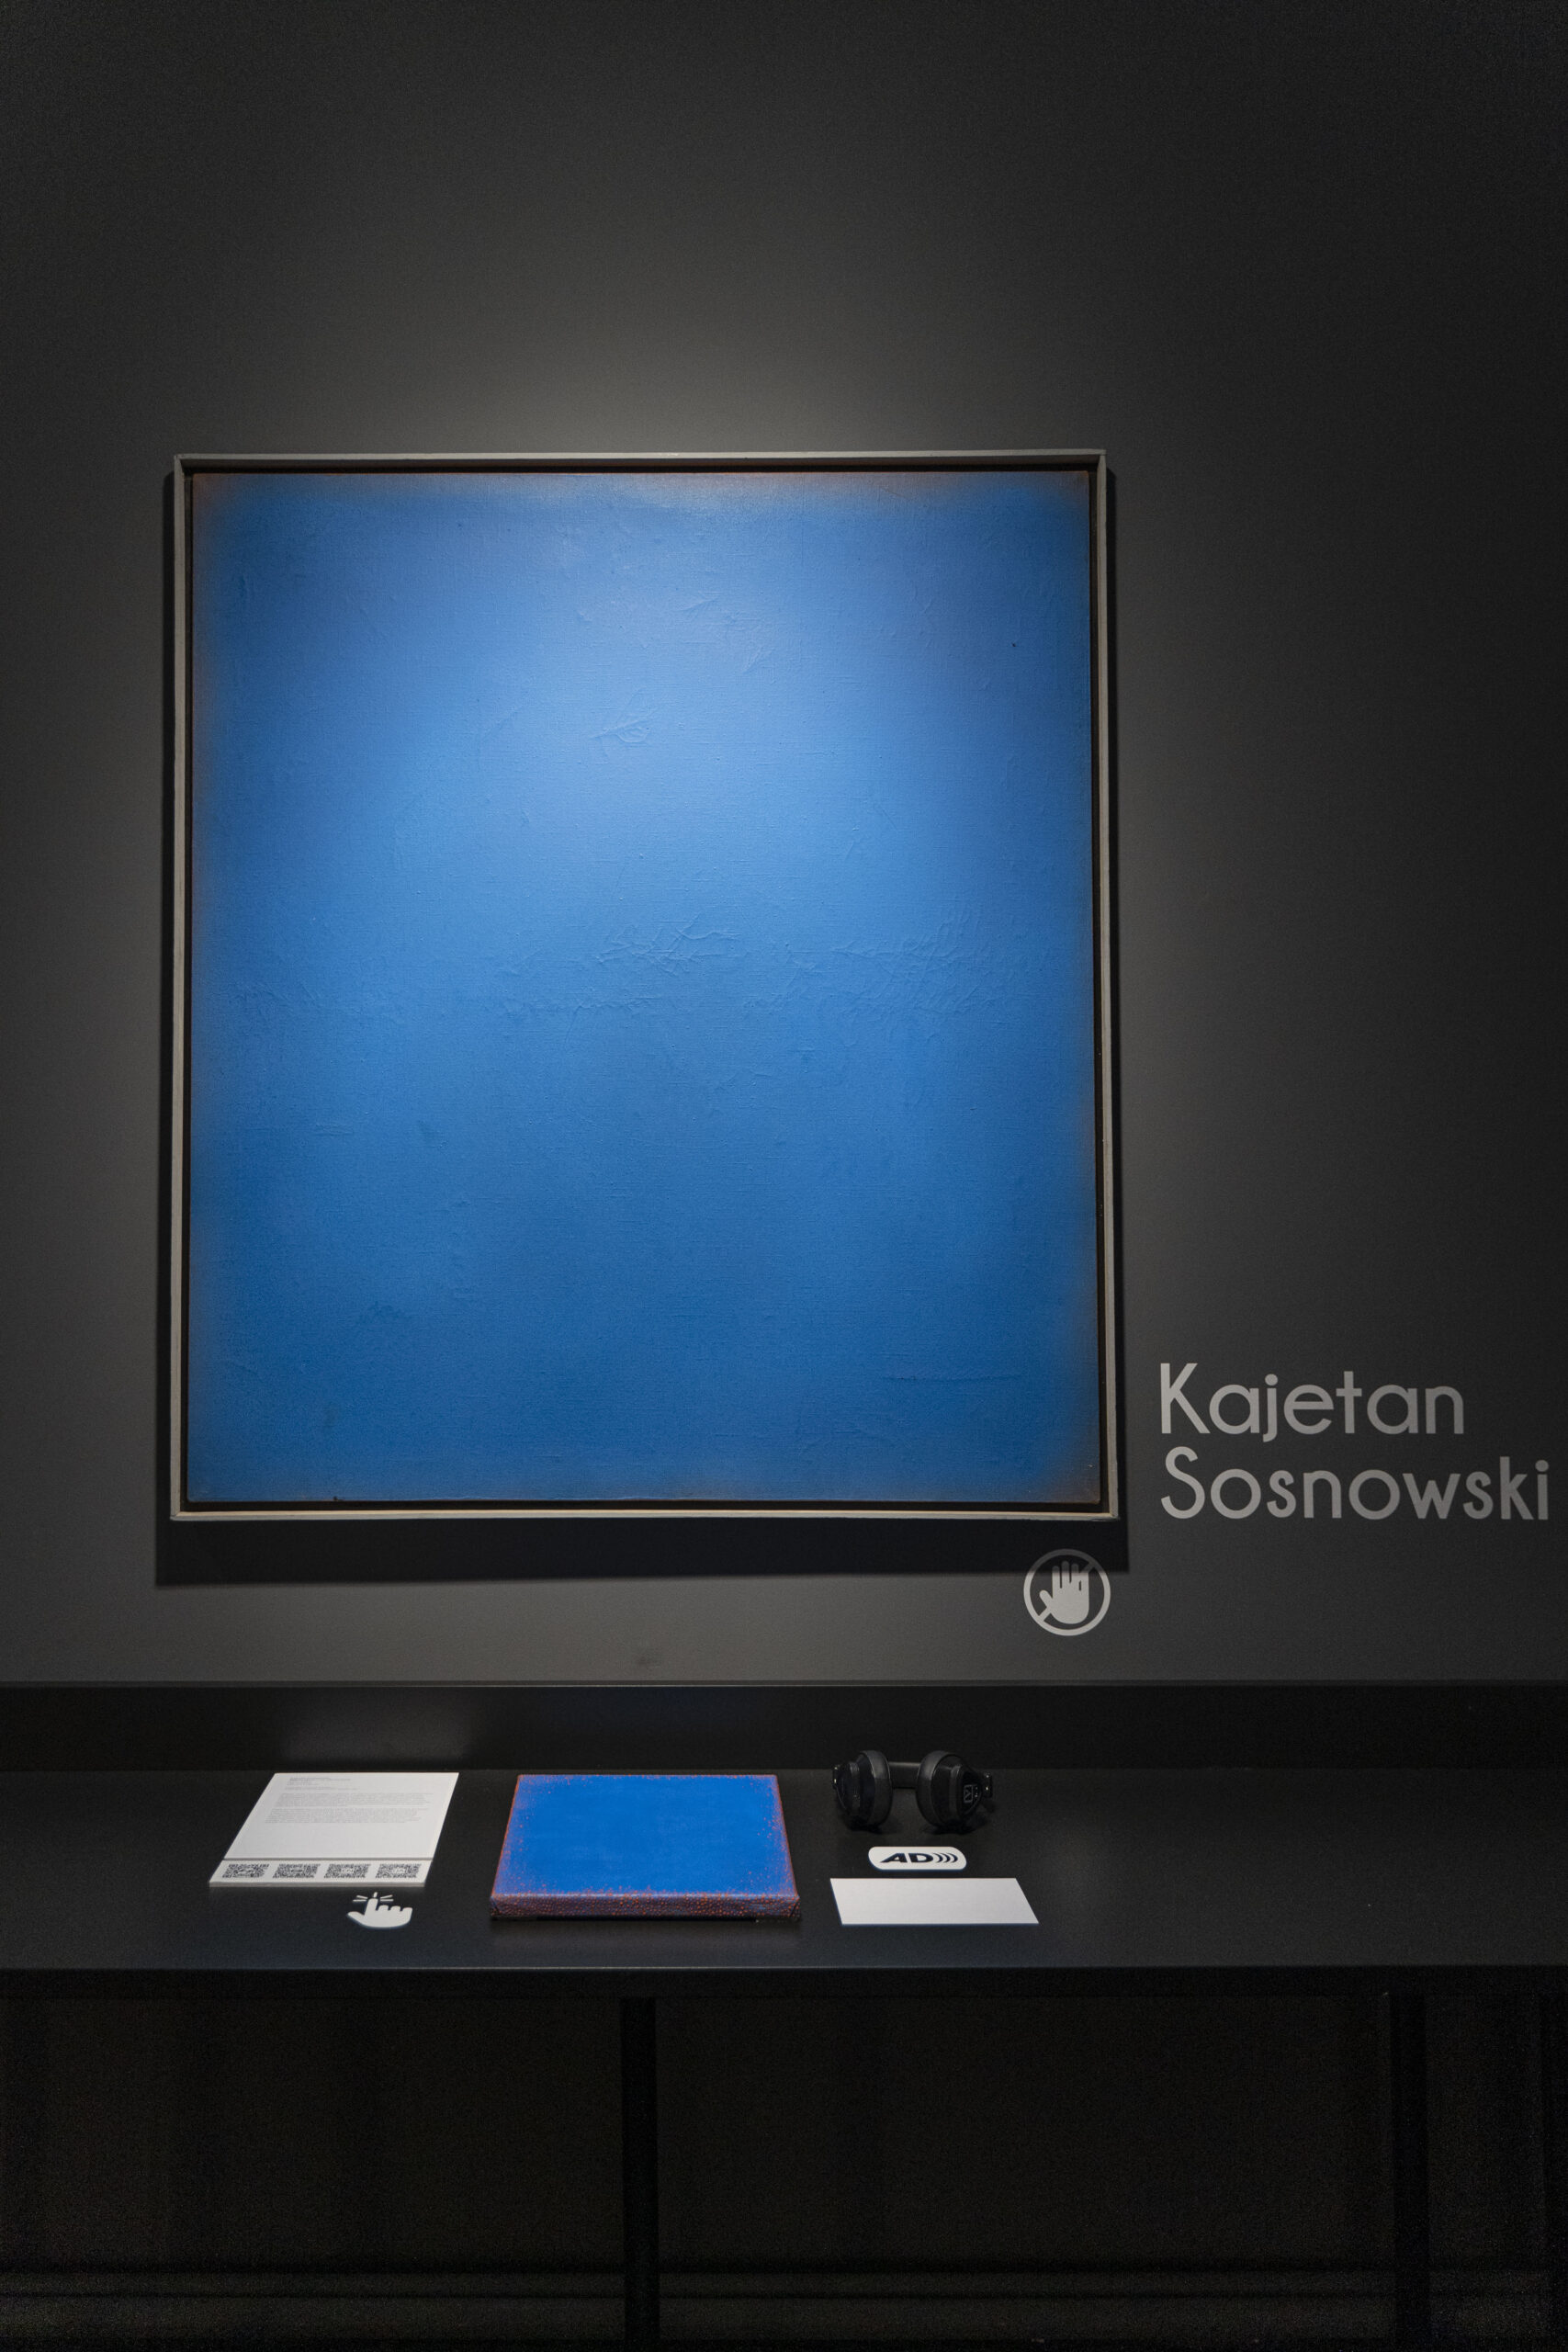 Documentation of the “Accessible Collection” exhibition, the work “Blue Painting” by Kajetan Sosnowski and the tactile diagram by Tetyana Falalieieva